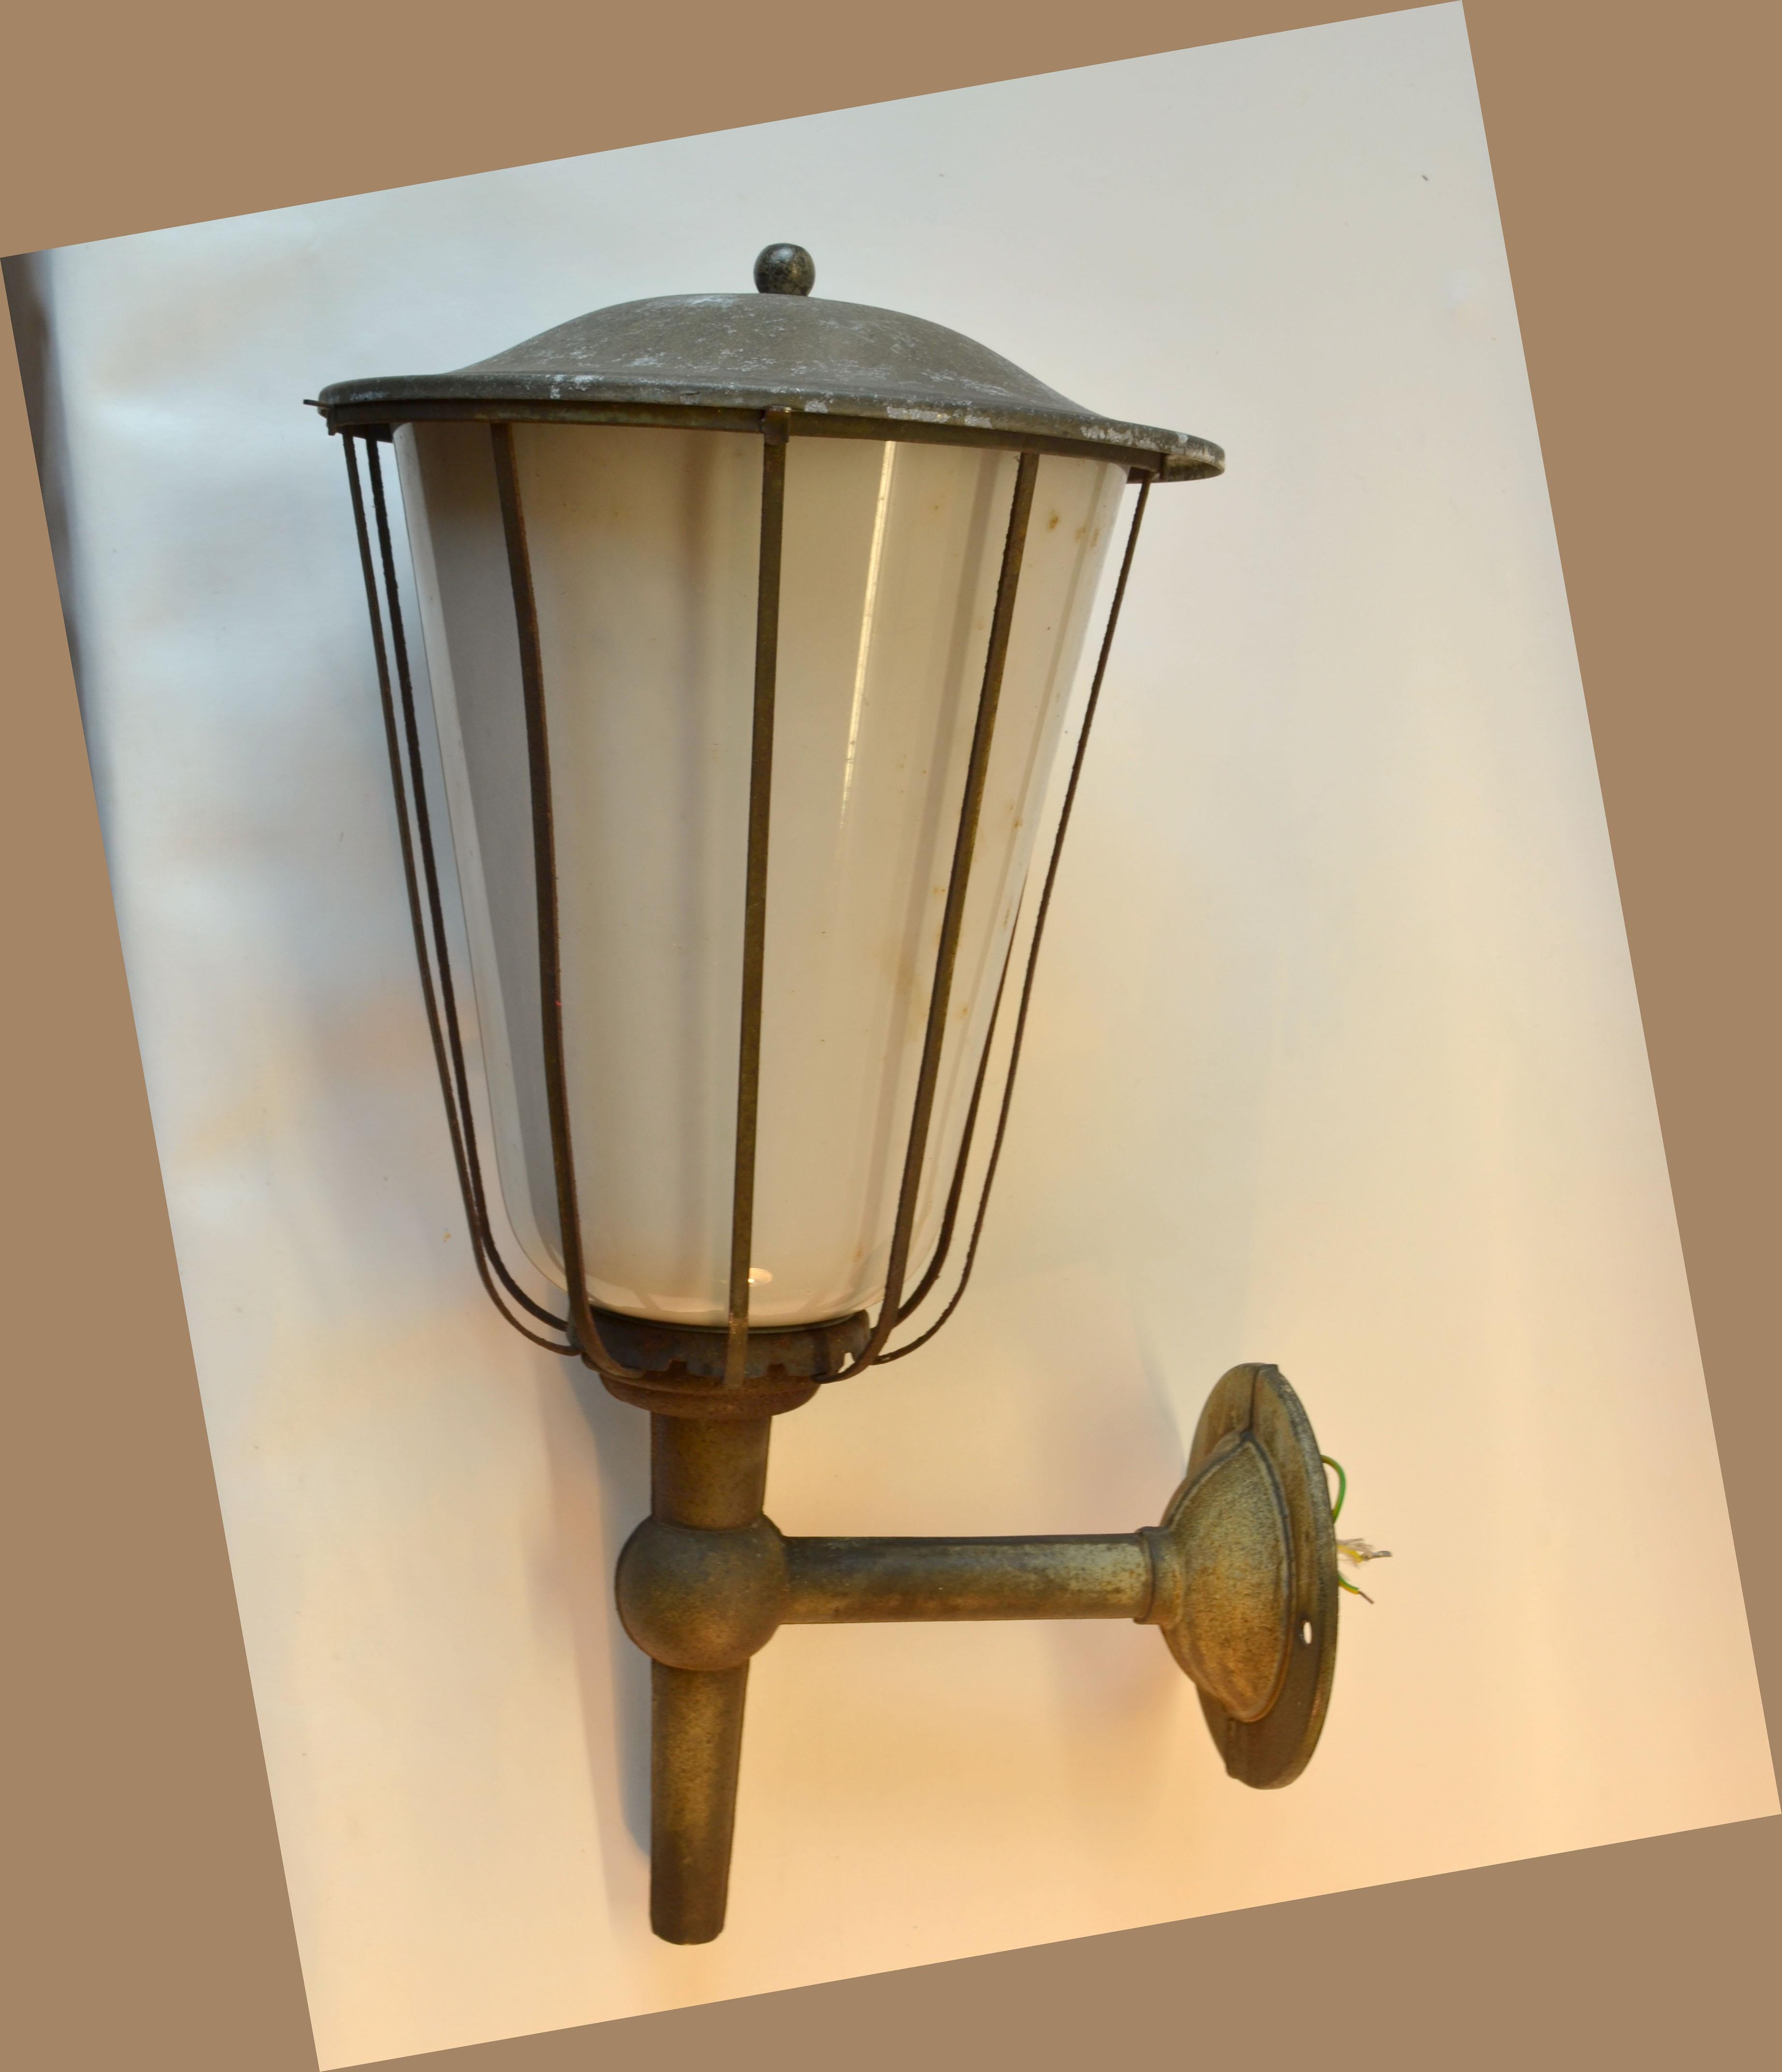 Pair of large outdoor lanterns in zinc plated metal and white glass are early 20th century French. The plating has a nice original patina.
They originated from a castle to the south of Germany near Stuttgart and will make a real statement in- or